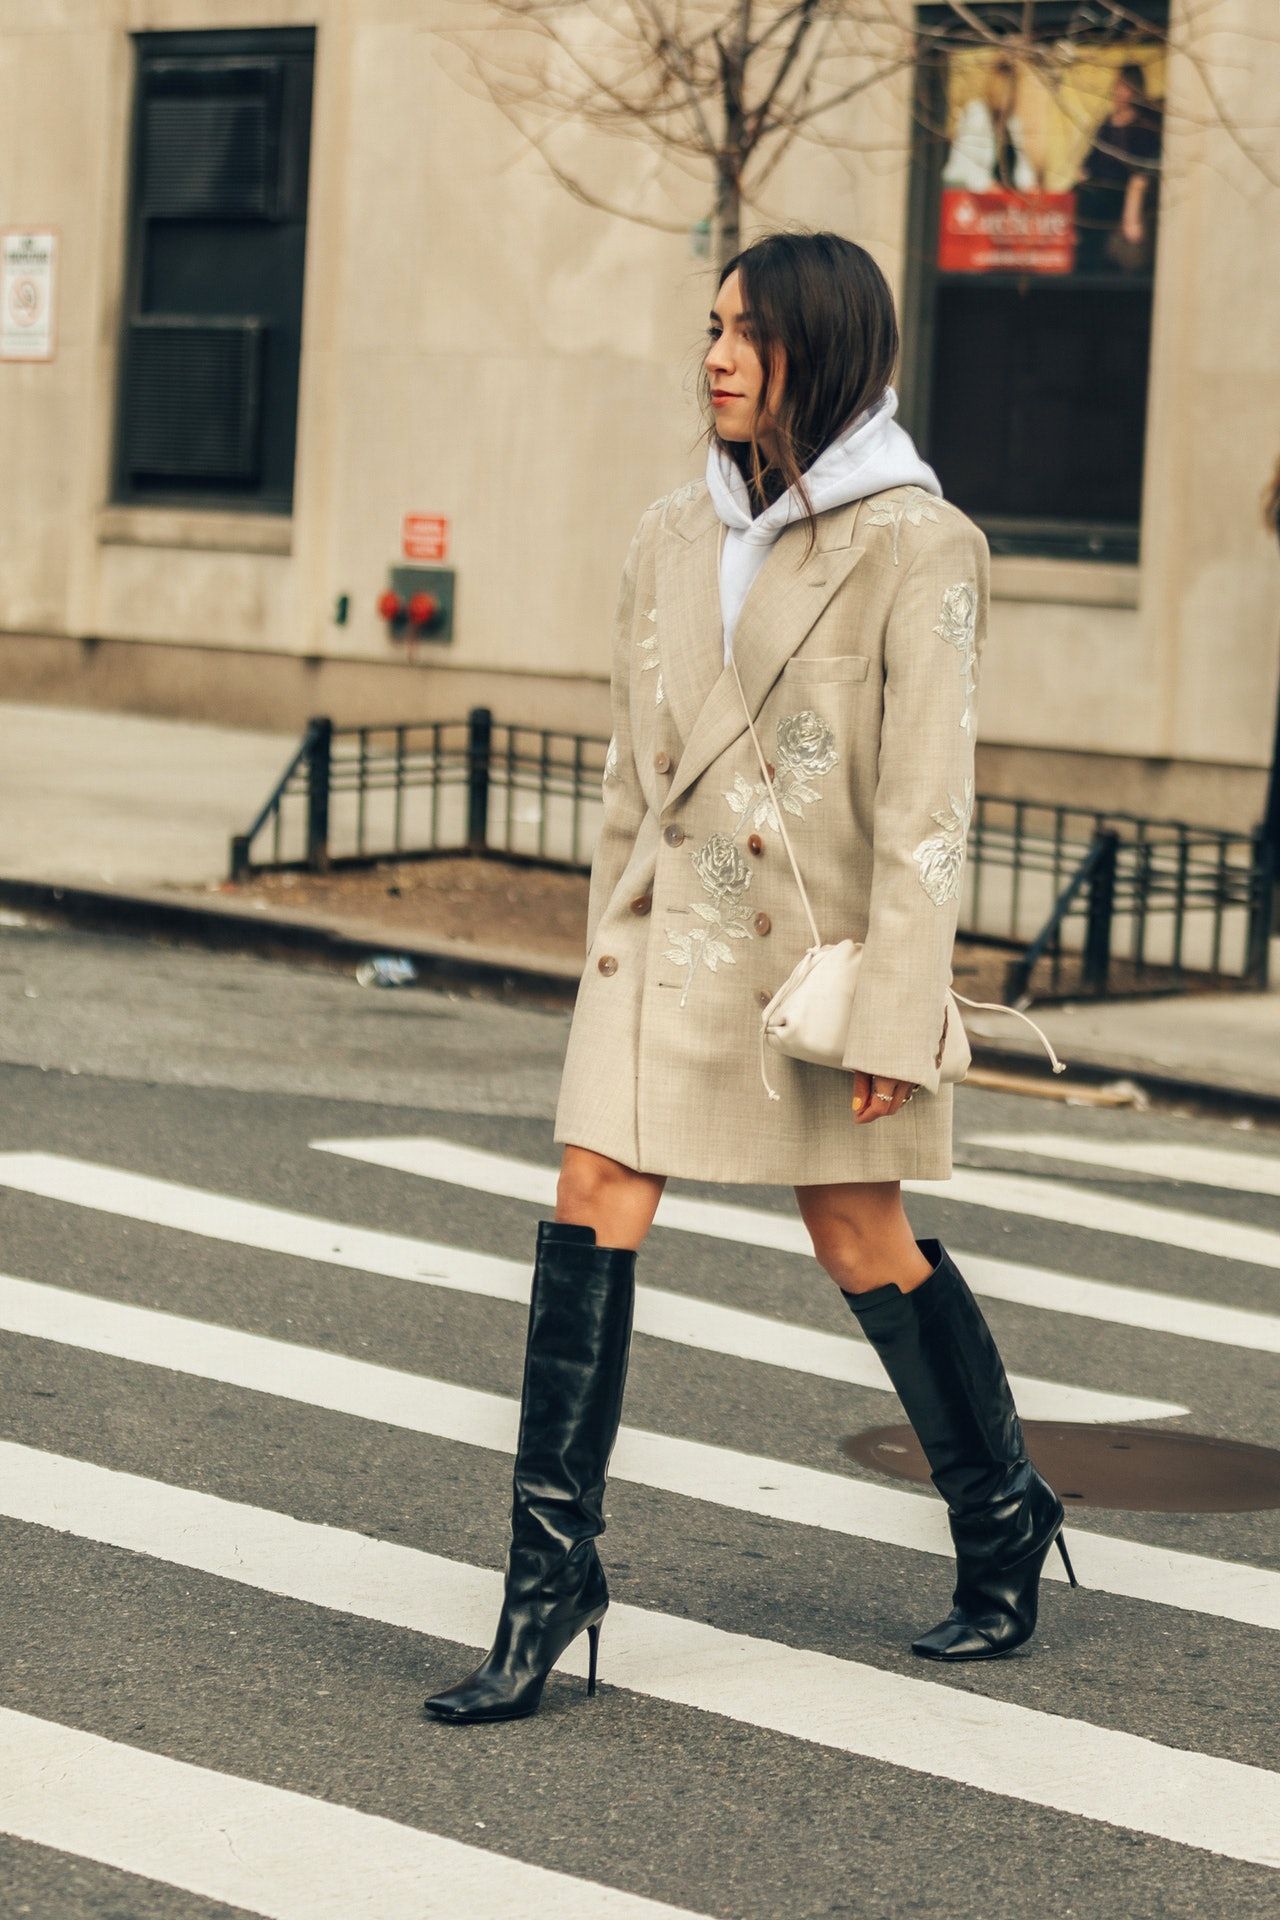 The Best Street Style From NYFW - The Best Street Style From NYFW -   18 style Winter chic ideas